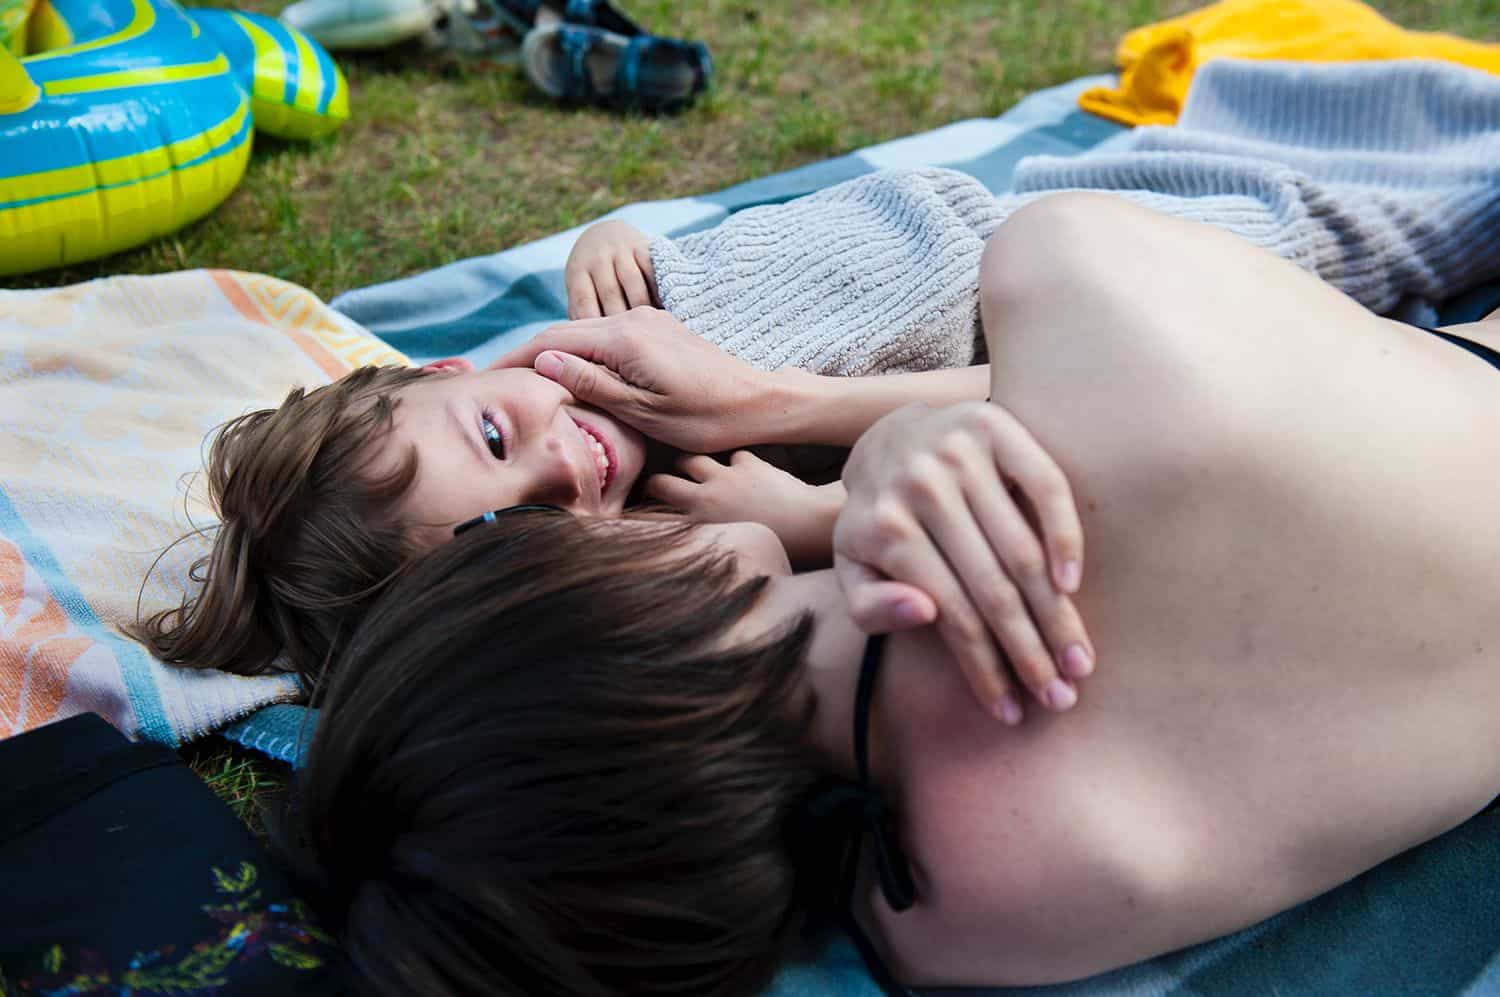 A mom and her child snuggle close while lying in bathing suits on a massive beach blanket